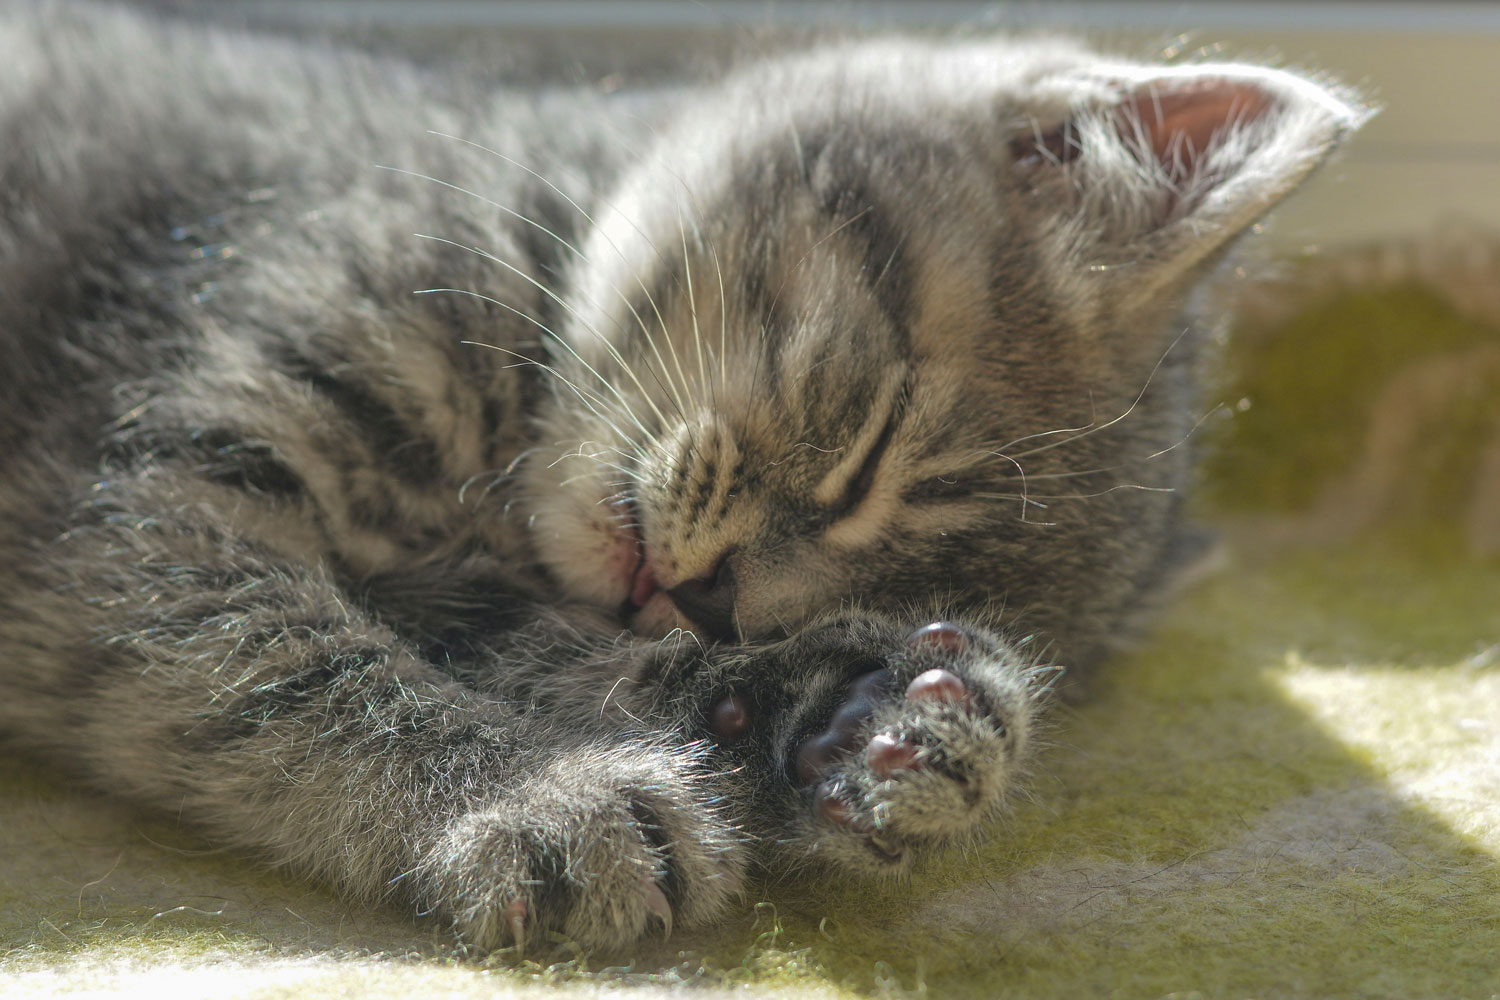 A super cute little kitten sticking out his tongue while sleeping